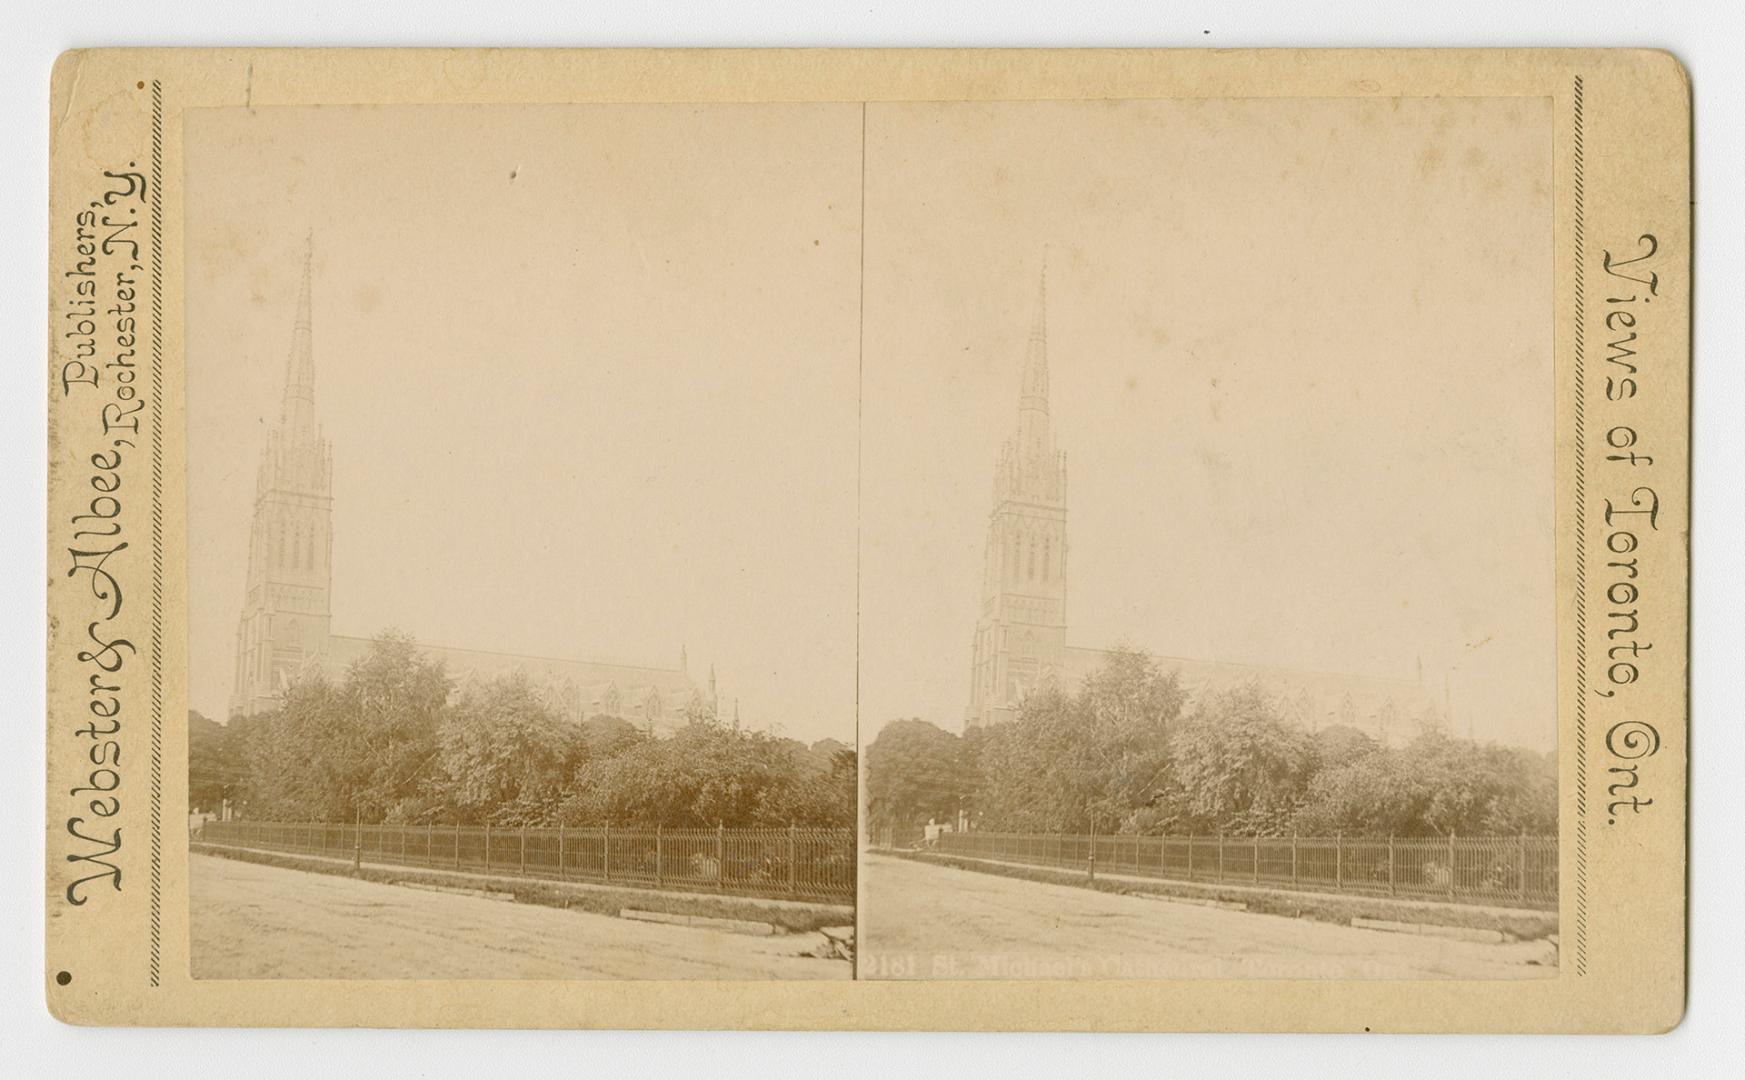 Pictures show the steeple of a large church building with trees and a road in front of it.